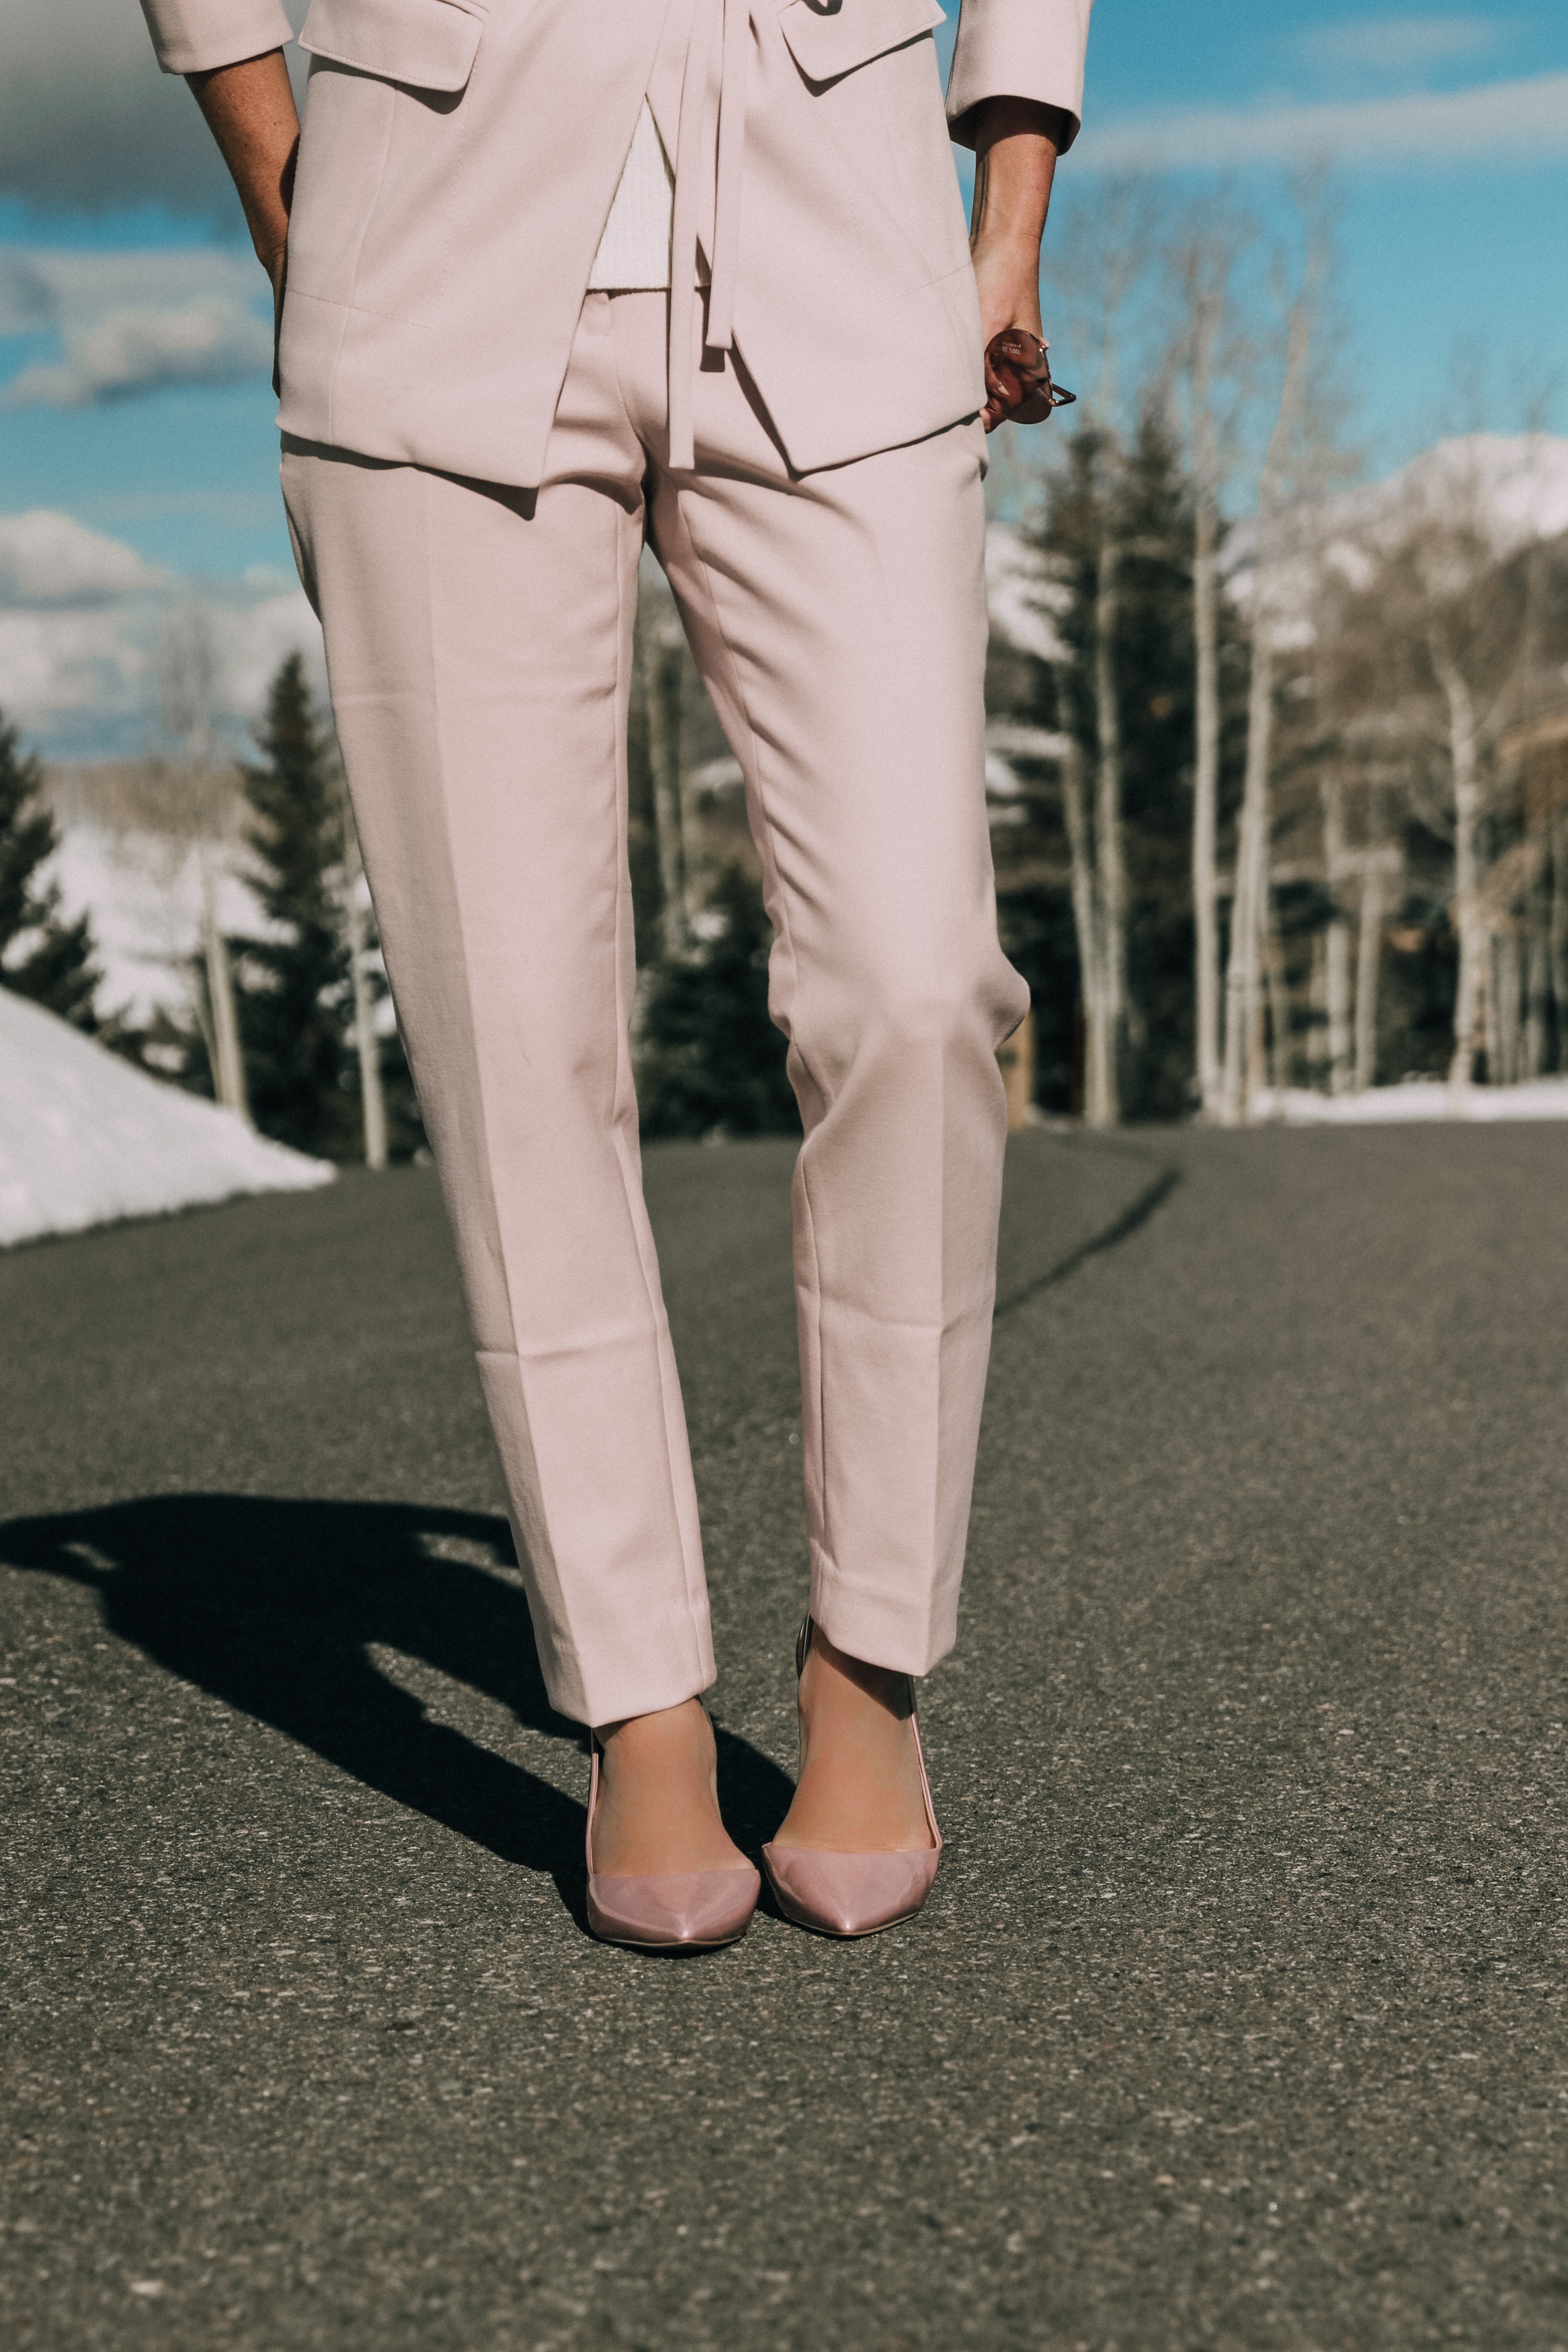 Pink Office Outfit, Fashion blogger Erin Busbee of BusbeeStyle.com wearing a pink power suit from White House Black Market, including a pink belted blazer, pink soft stretch pants, white puff sleeve sweater dress, pink pumps, pink earrings, and aviator sunglasses in Telluride, Colorado